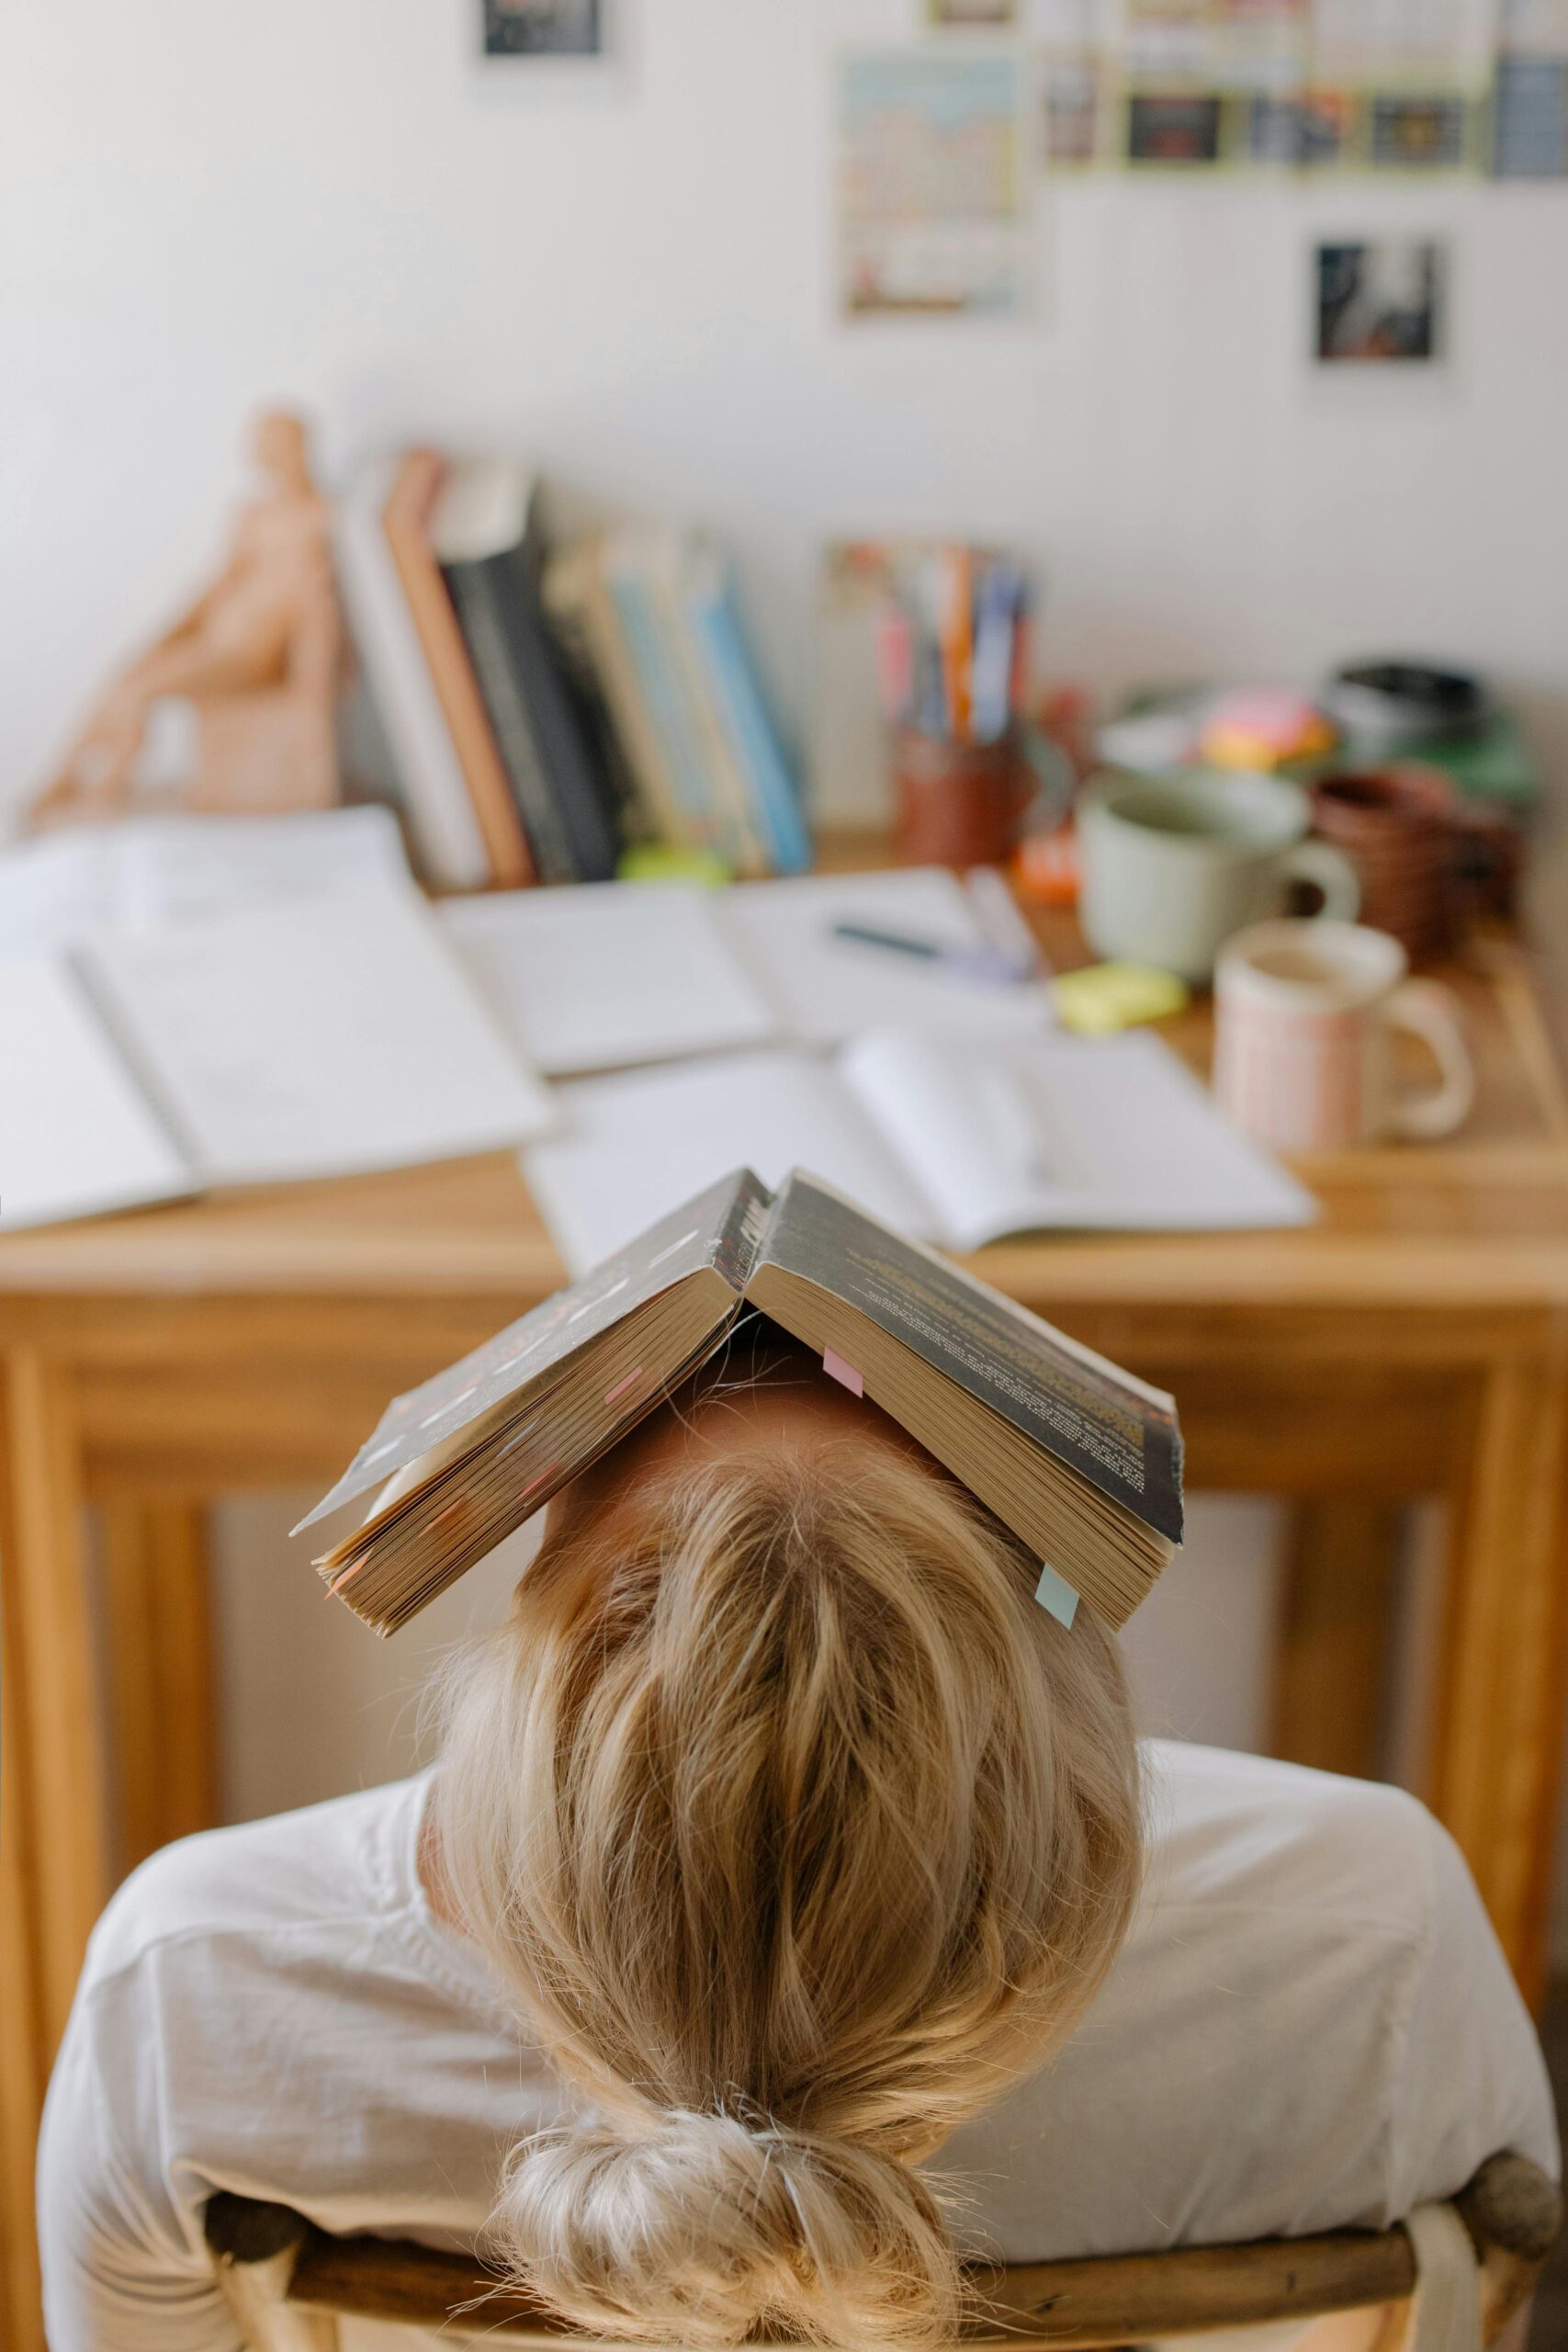 New York City woman sitting at her desk after a stressful day, with a book on her face, leaning backwards. Time management can help you feel less stressed in the day to day.